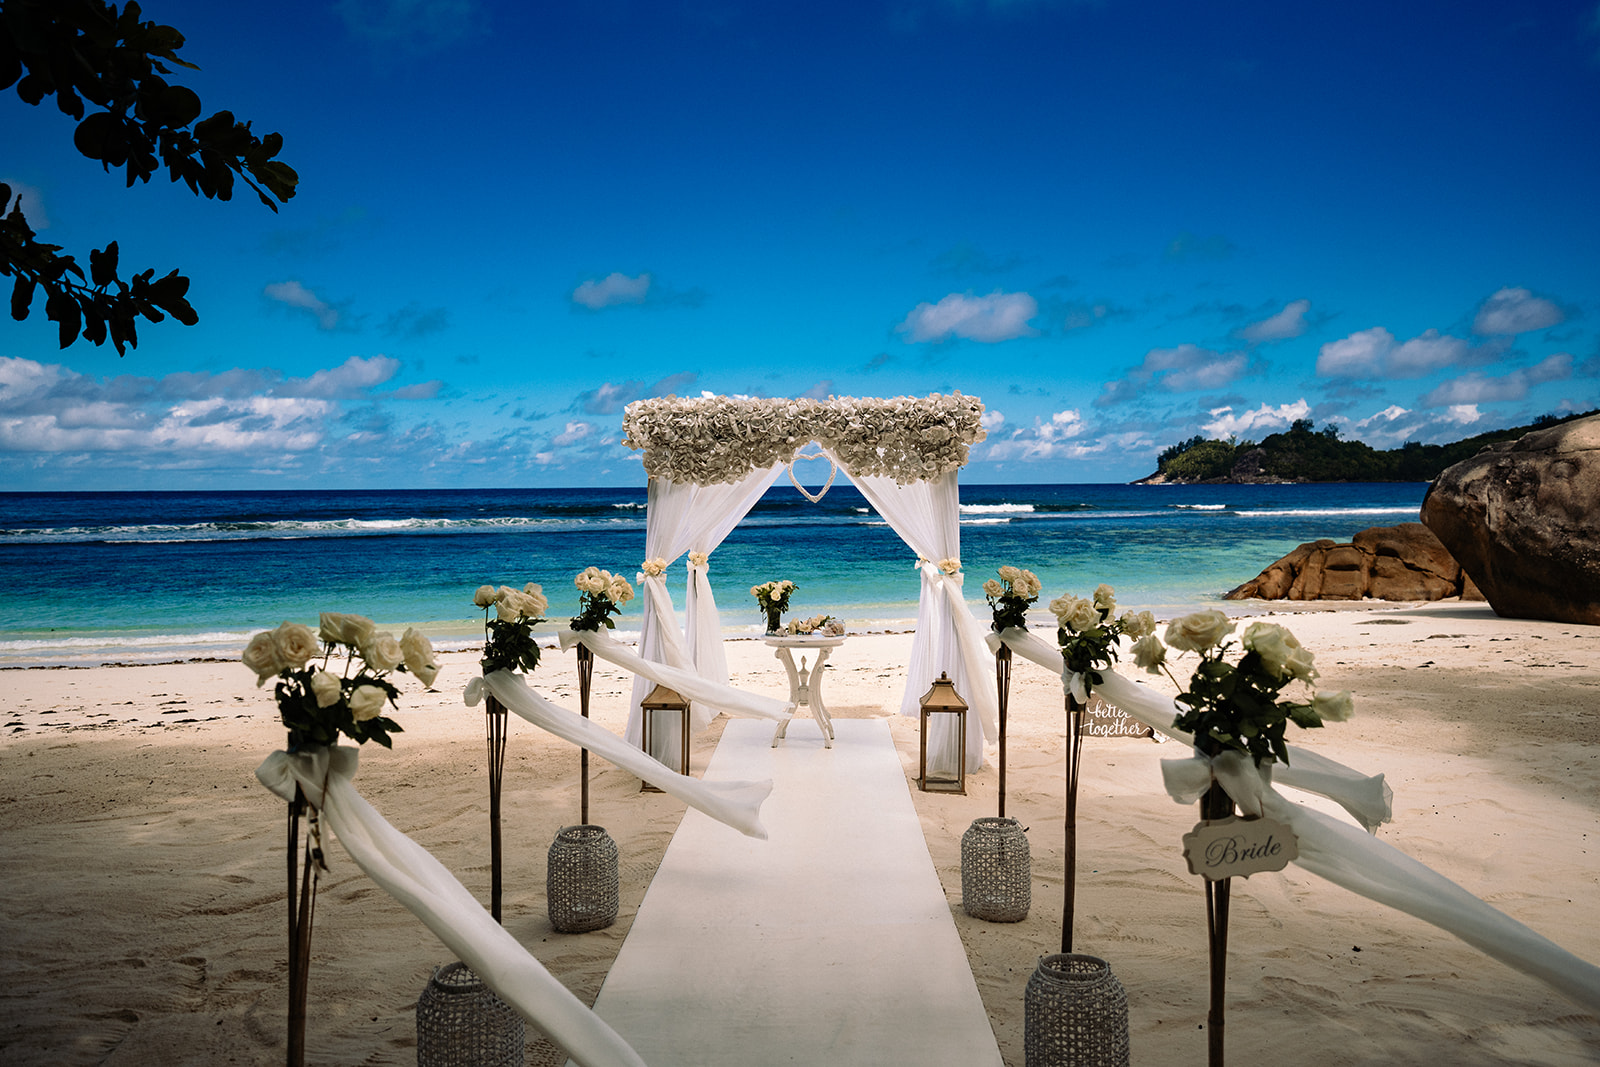 Photography of a wedding in Seychelles on Baie Lazare beach